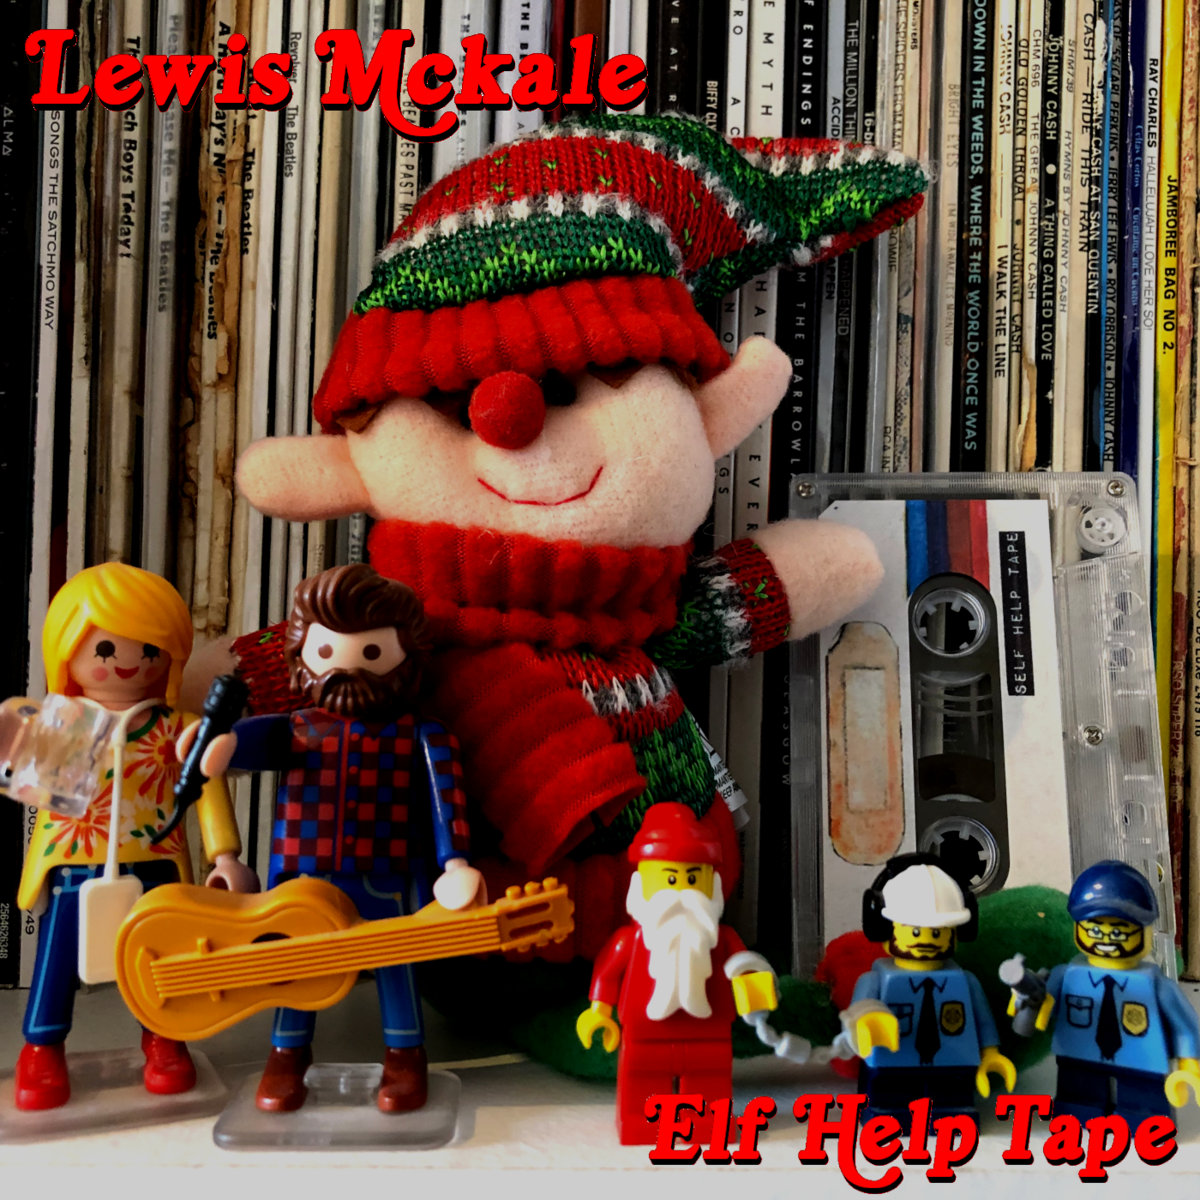 .@Lewis_Mckale returns with 2023's best title, 'Elf Help Tape', and three terrific songs now at @Bandcamp! lewismckale.bandcamp.com/album/elf-help…